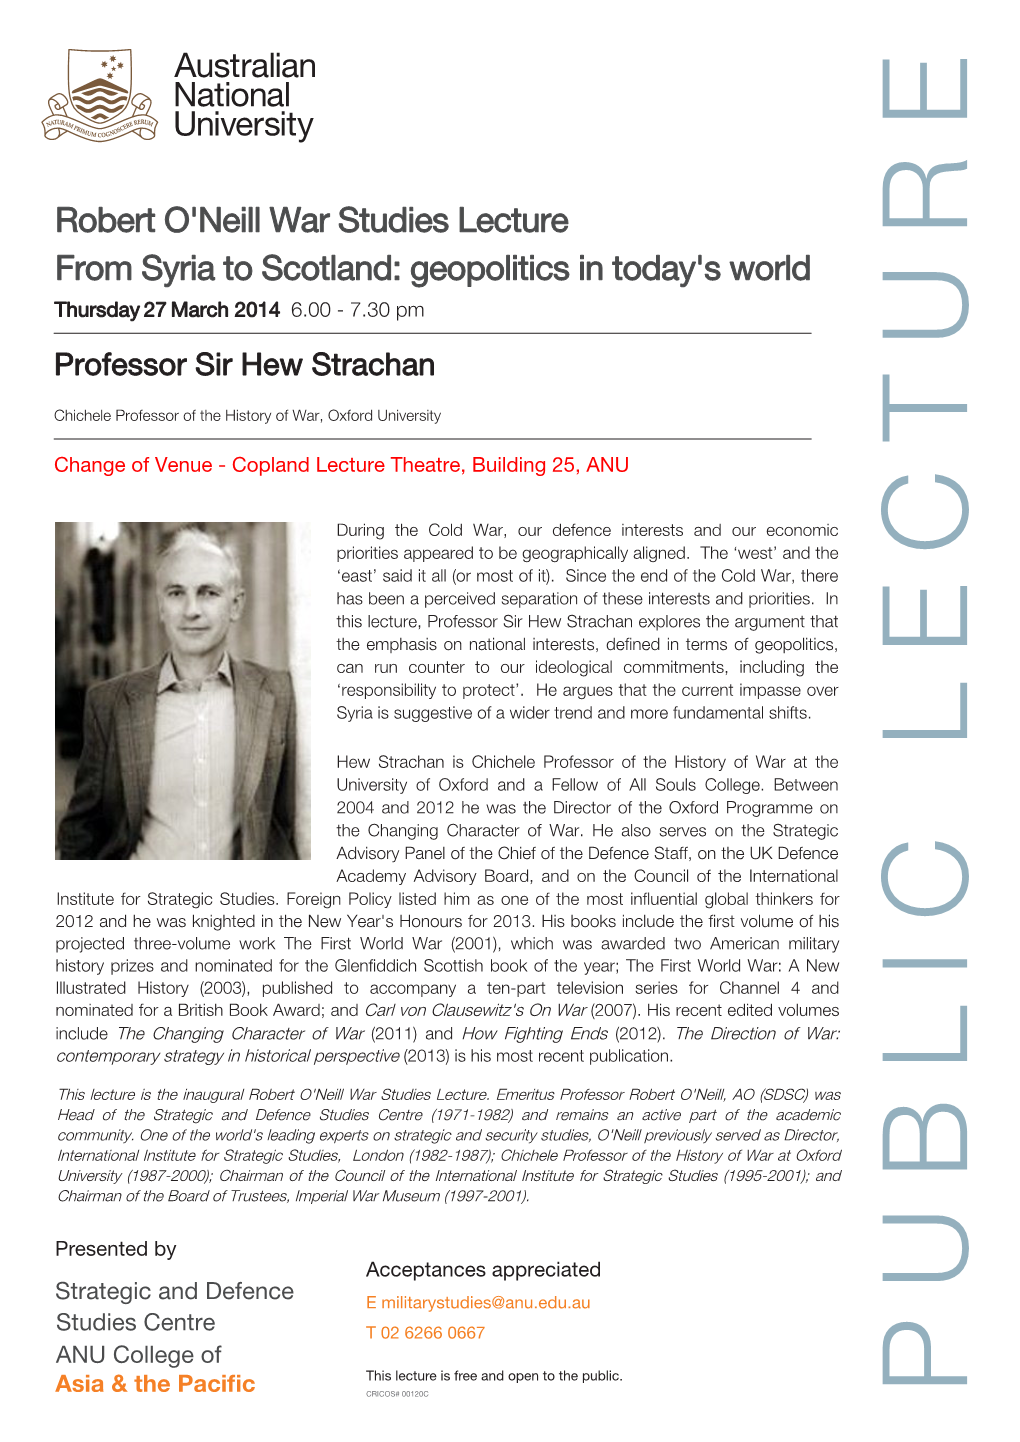 Robert O'neill War Studies Lecture from Syria to Scotland: Geopolitics in Today's World Thursday 27 March 2014 6.00 - 7.30 Pm Professor Sir Hew Strachan